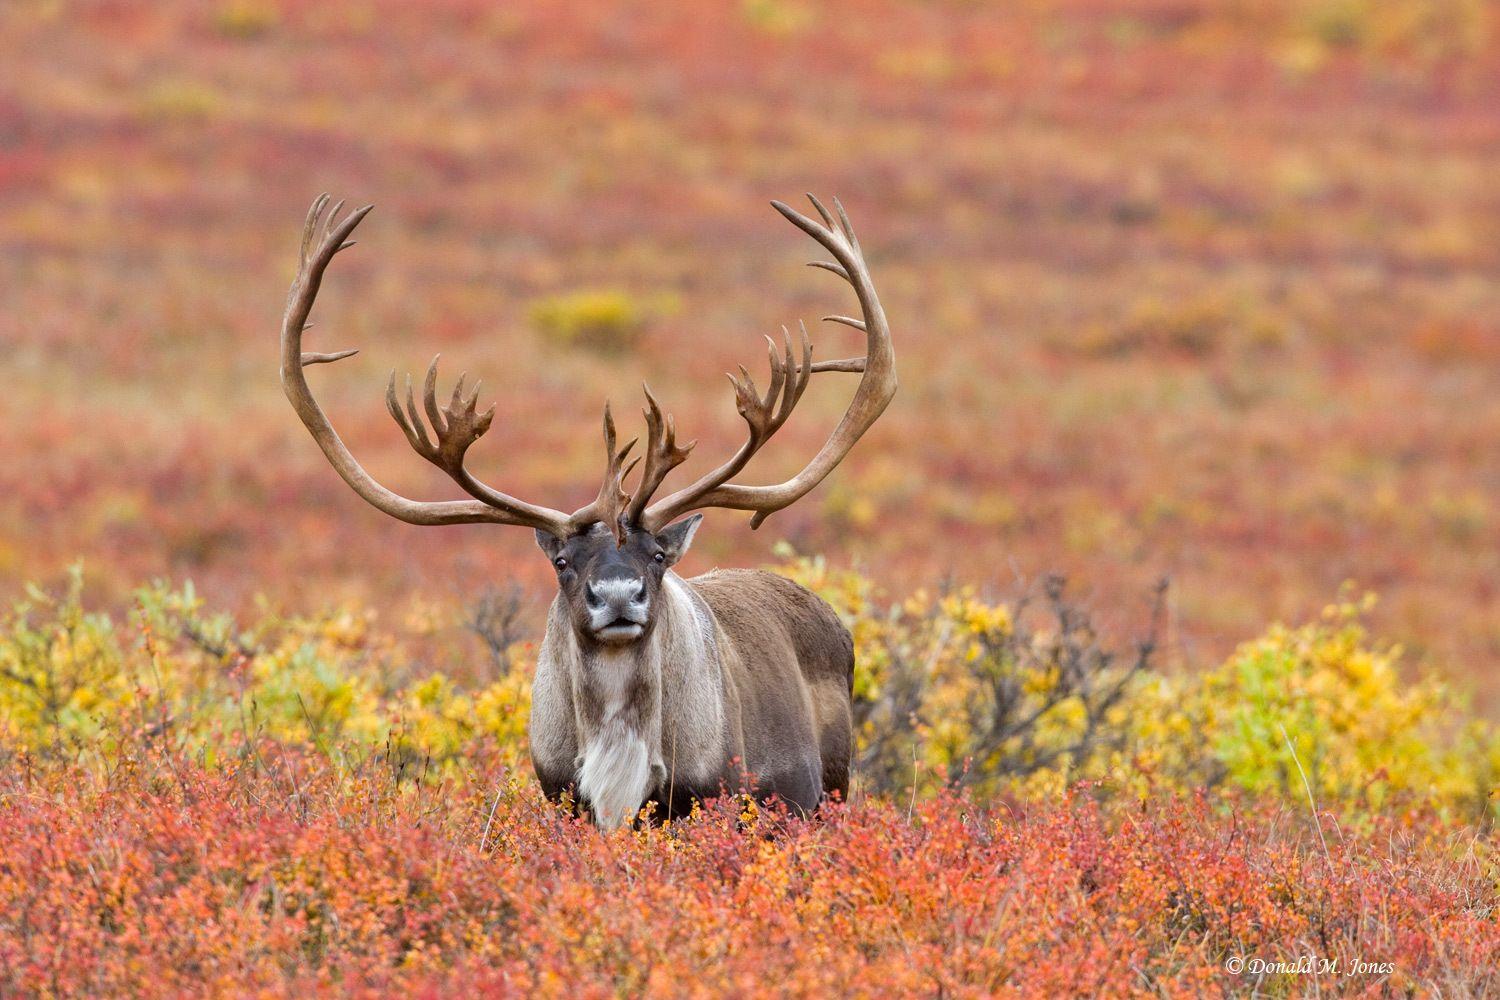 Wallpaper Of The Day: Cariboux1000 Caribou Pics